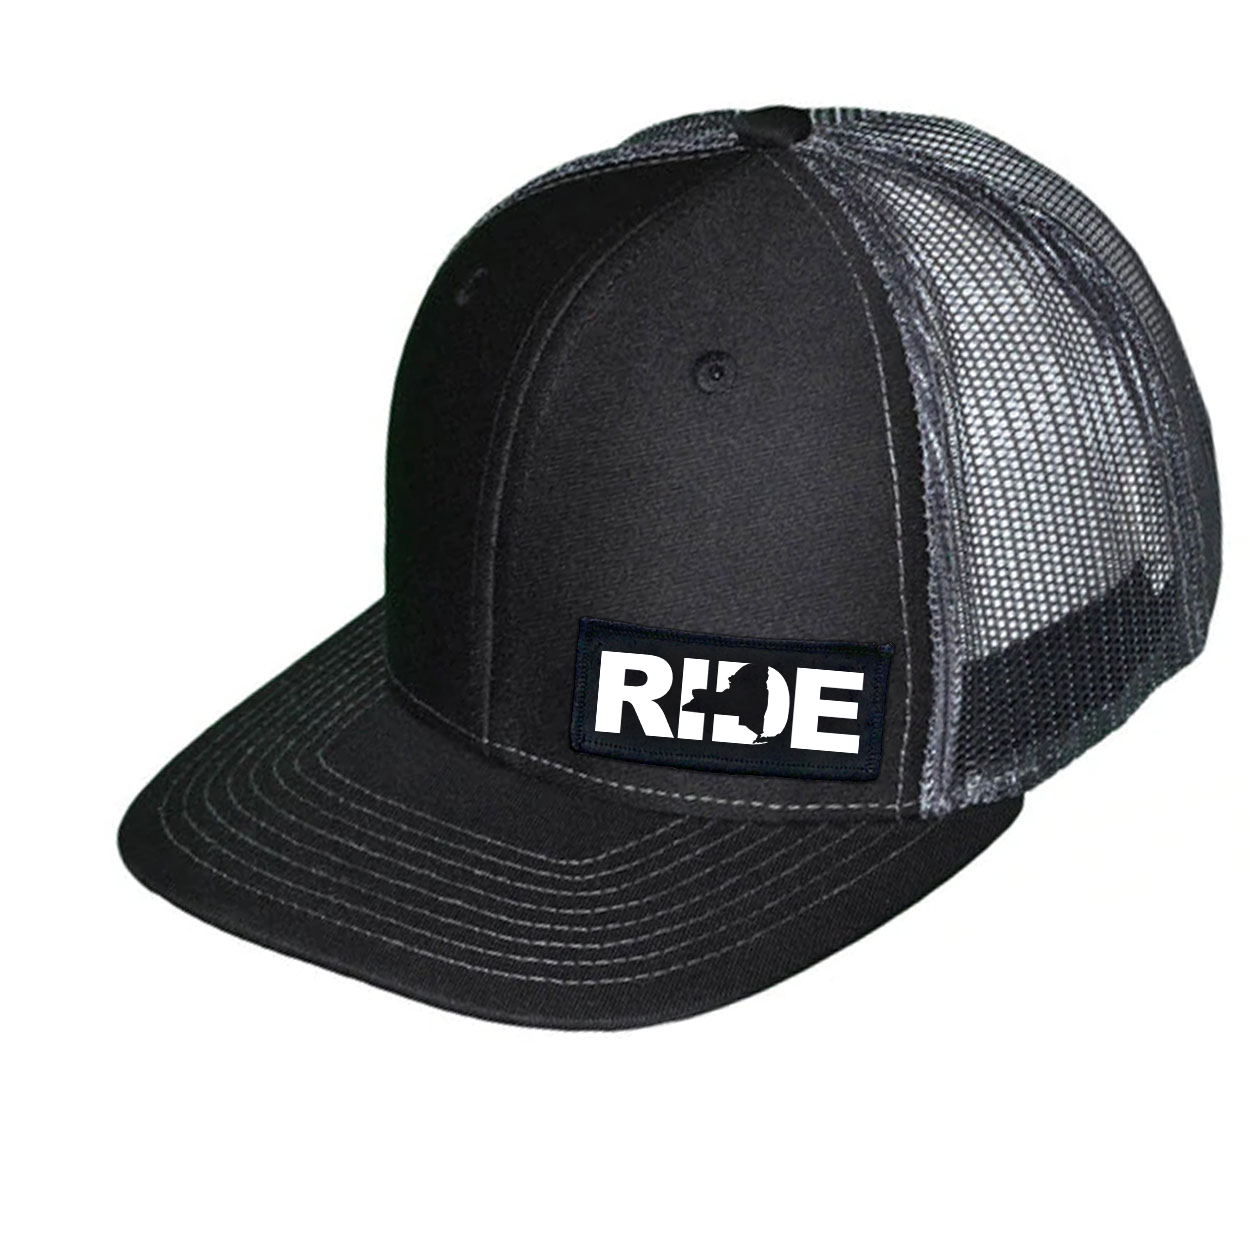 Ride New York Night Out Embroidered Snapback Trucker Hat Black/Gray